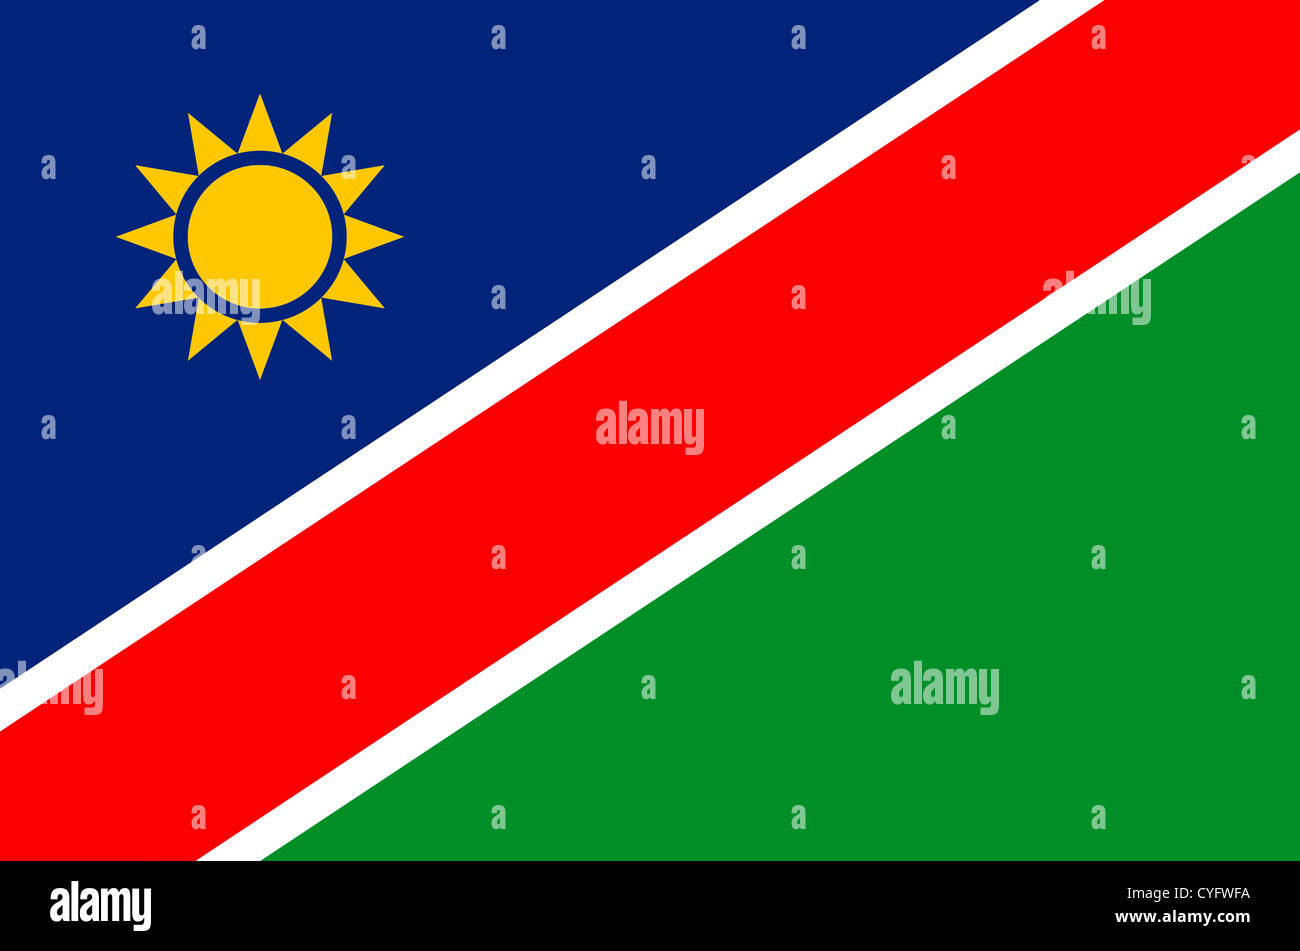 National flag of the Republic of Namibia. Stock Photo